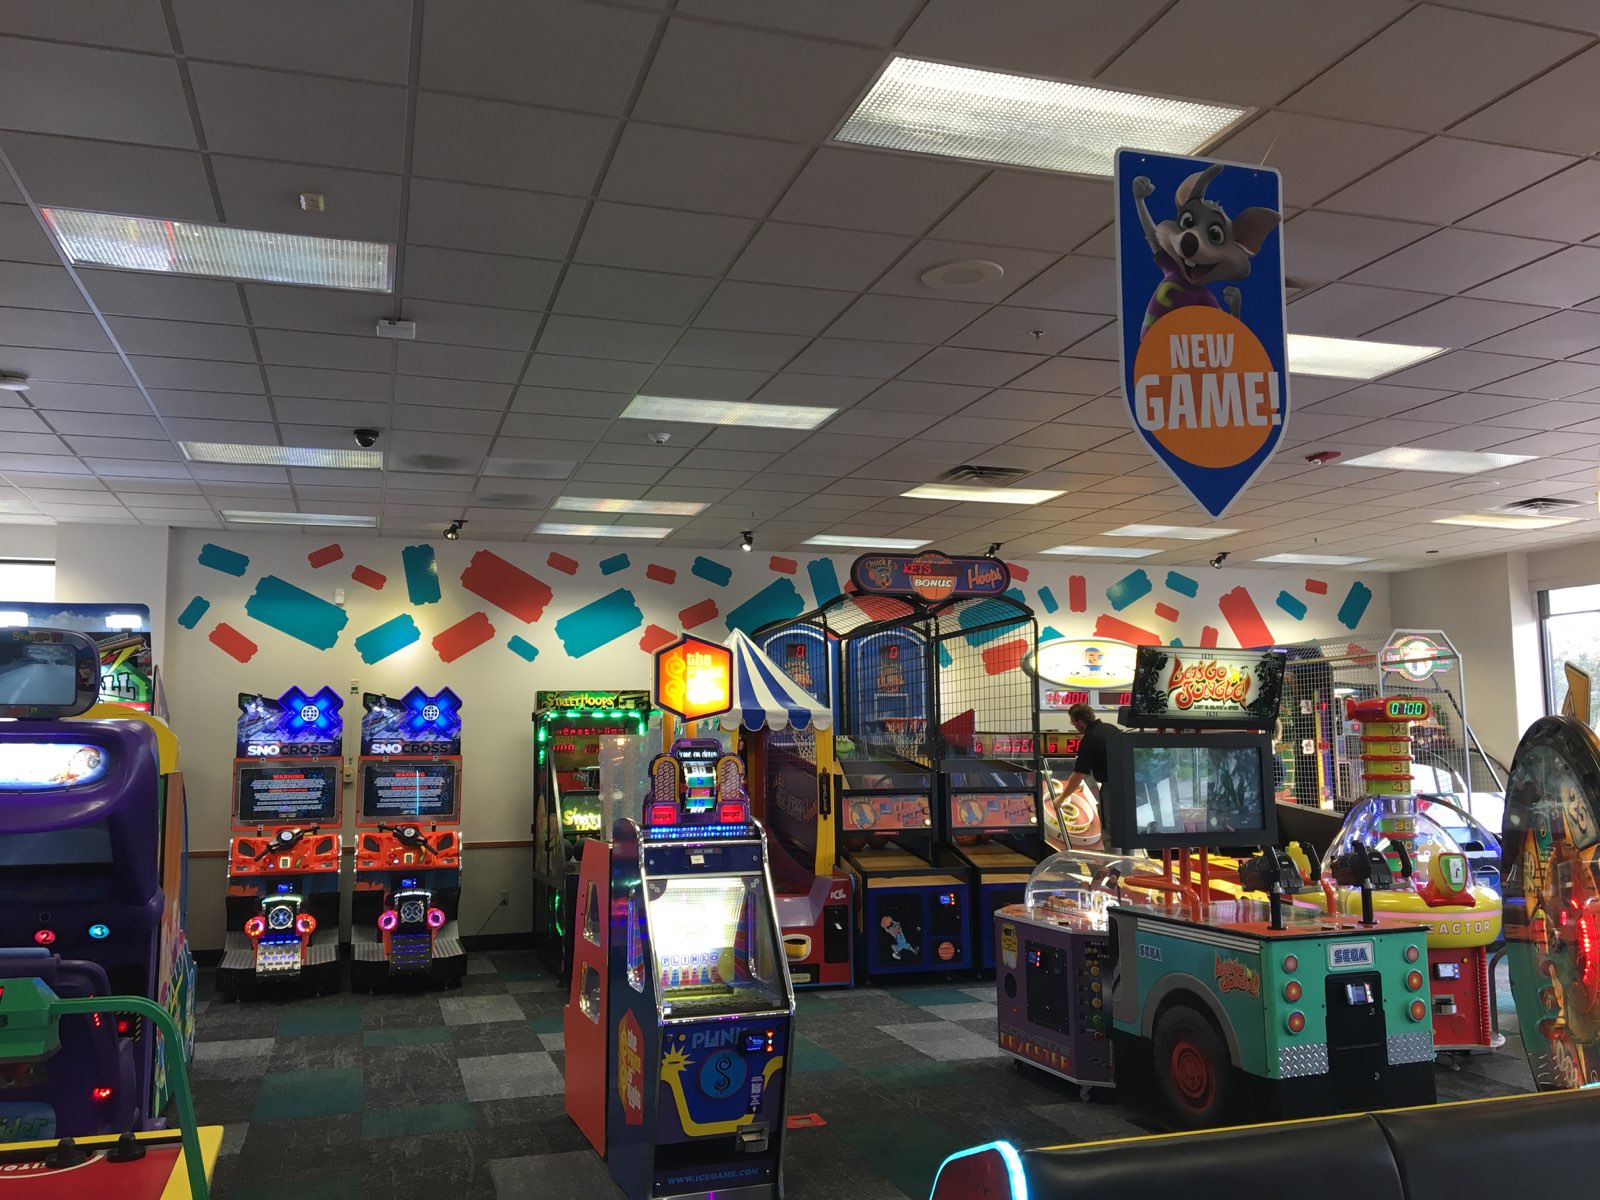 Indoor signage banner for Chuck E Cheese